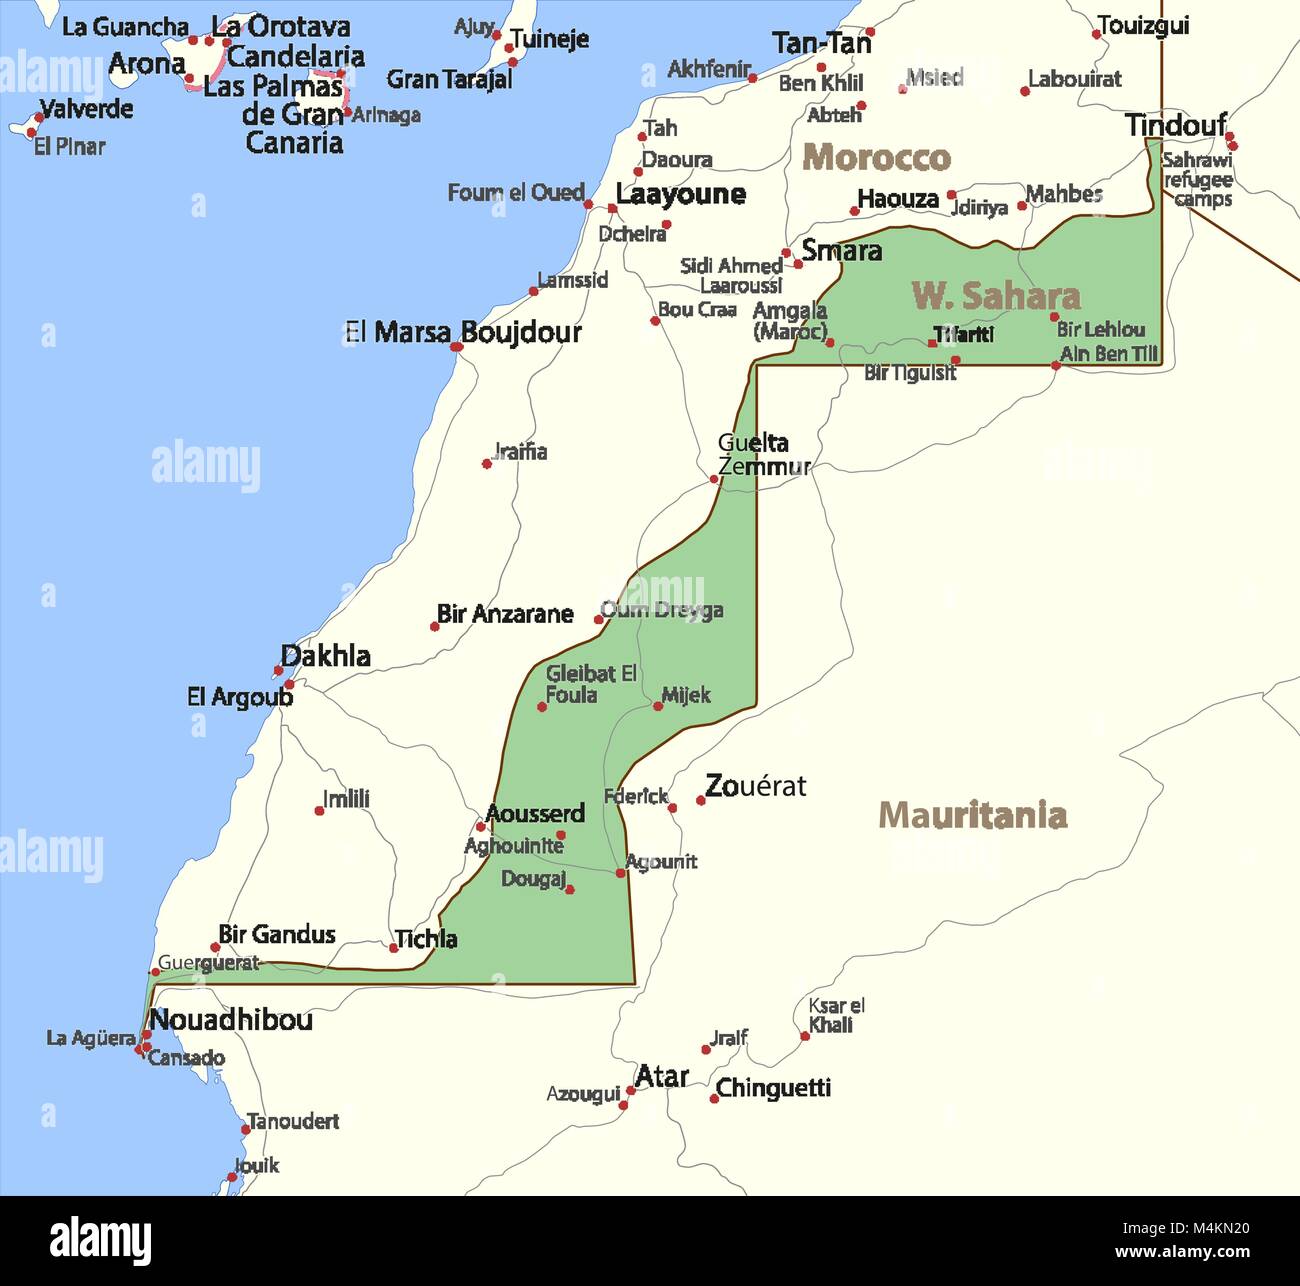 Map of Western Sahara. Shows country borders, urban areas, place names and roads. Labels in English where possible. Projection: Mercator. Stock Vector